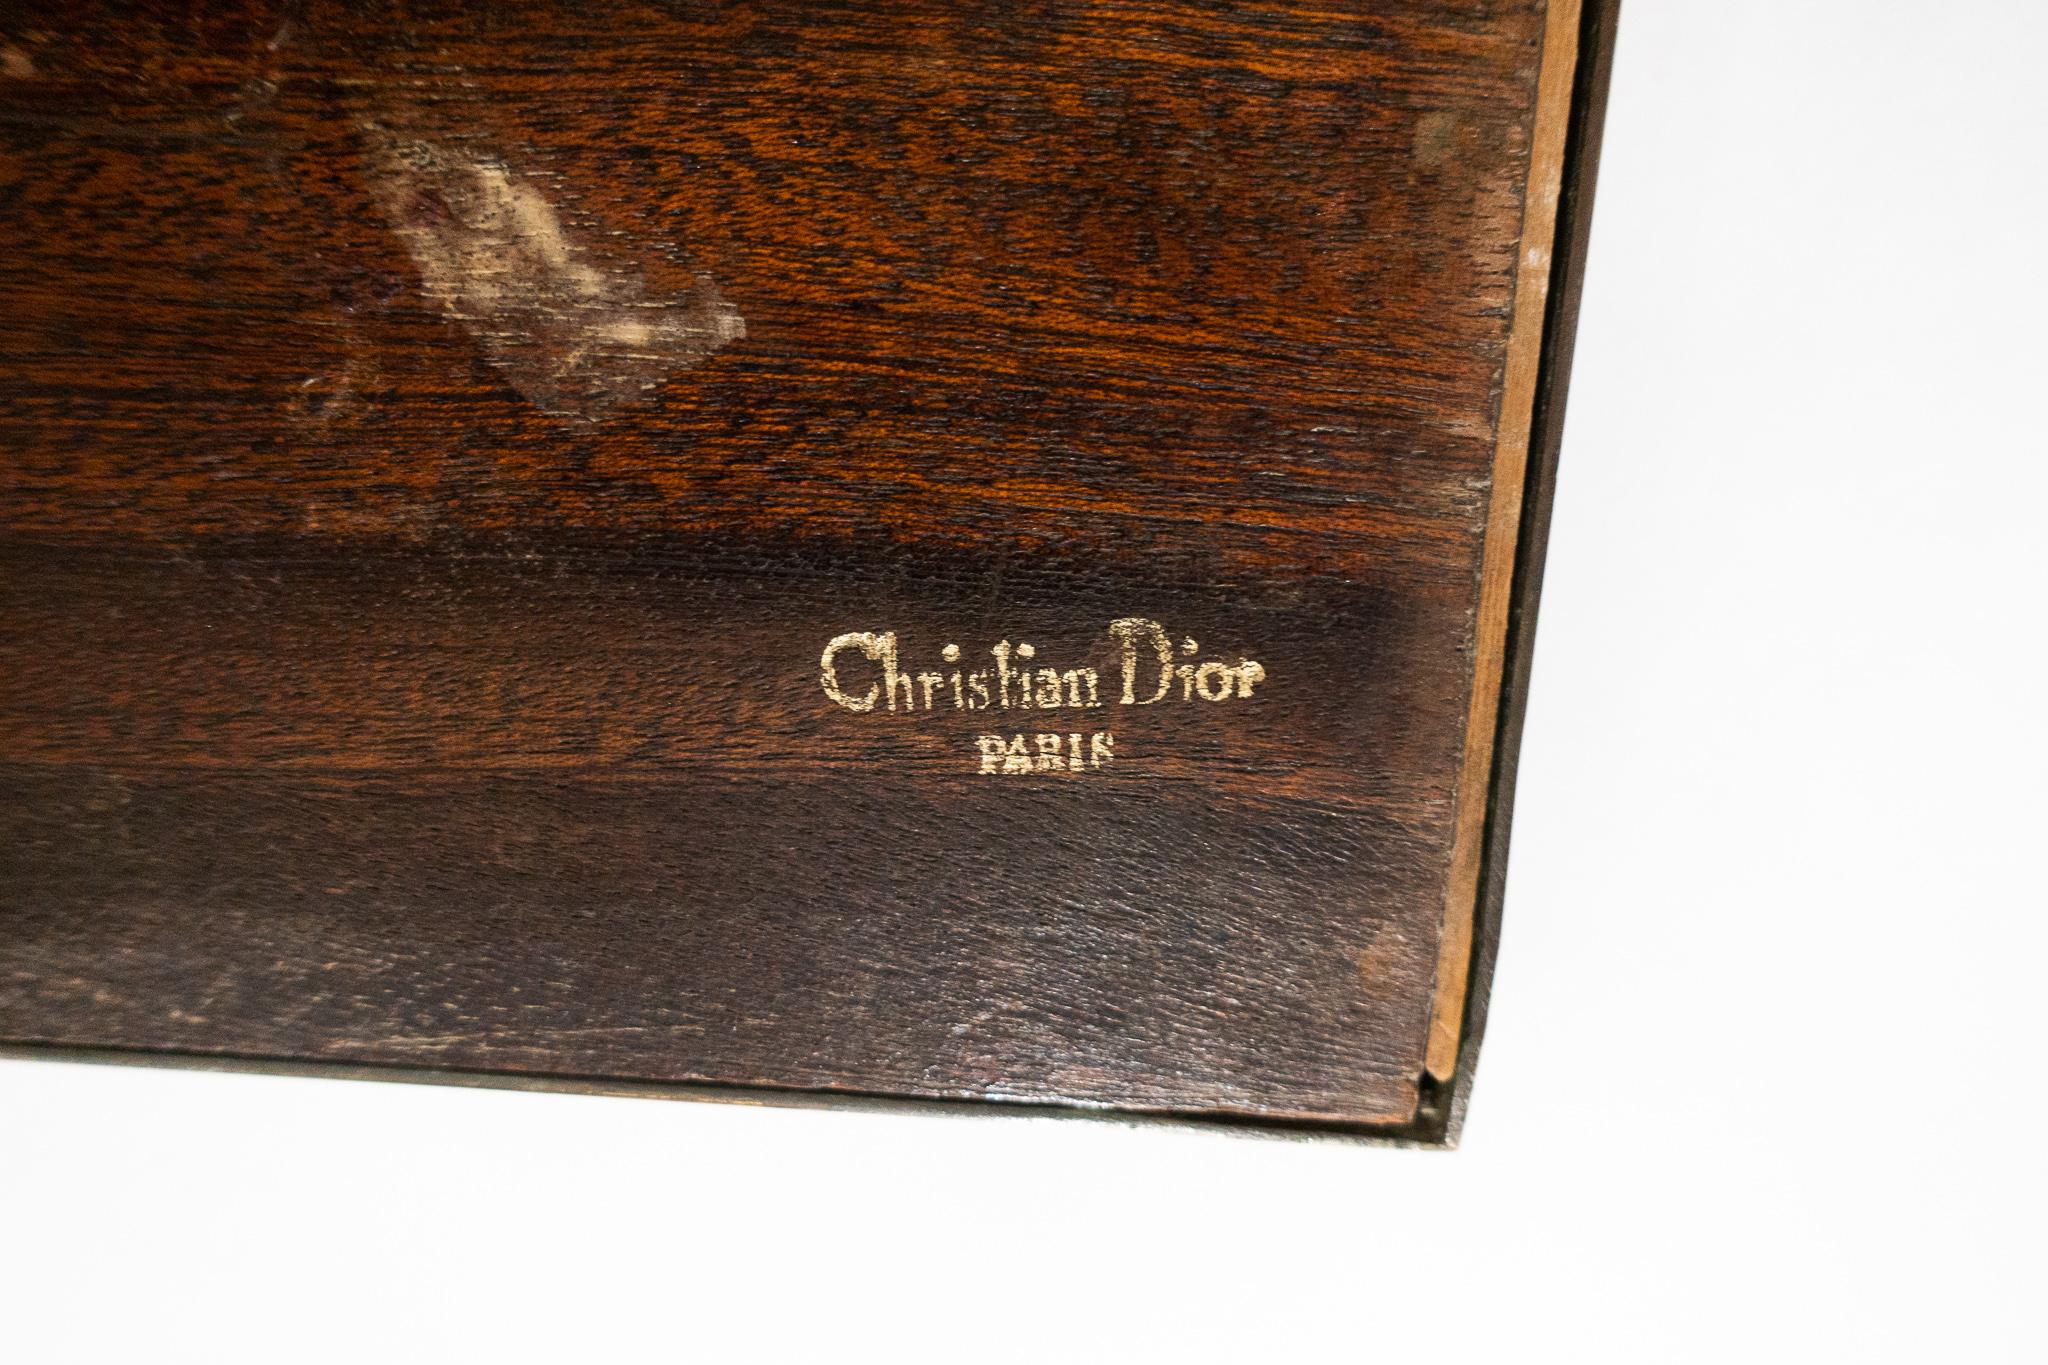 Inlaid Wooden Panel with Mushrooms and a Butterfly, Signed Christian Dior, Paris 1